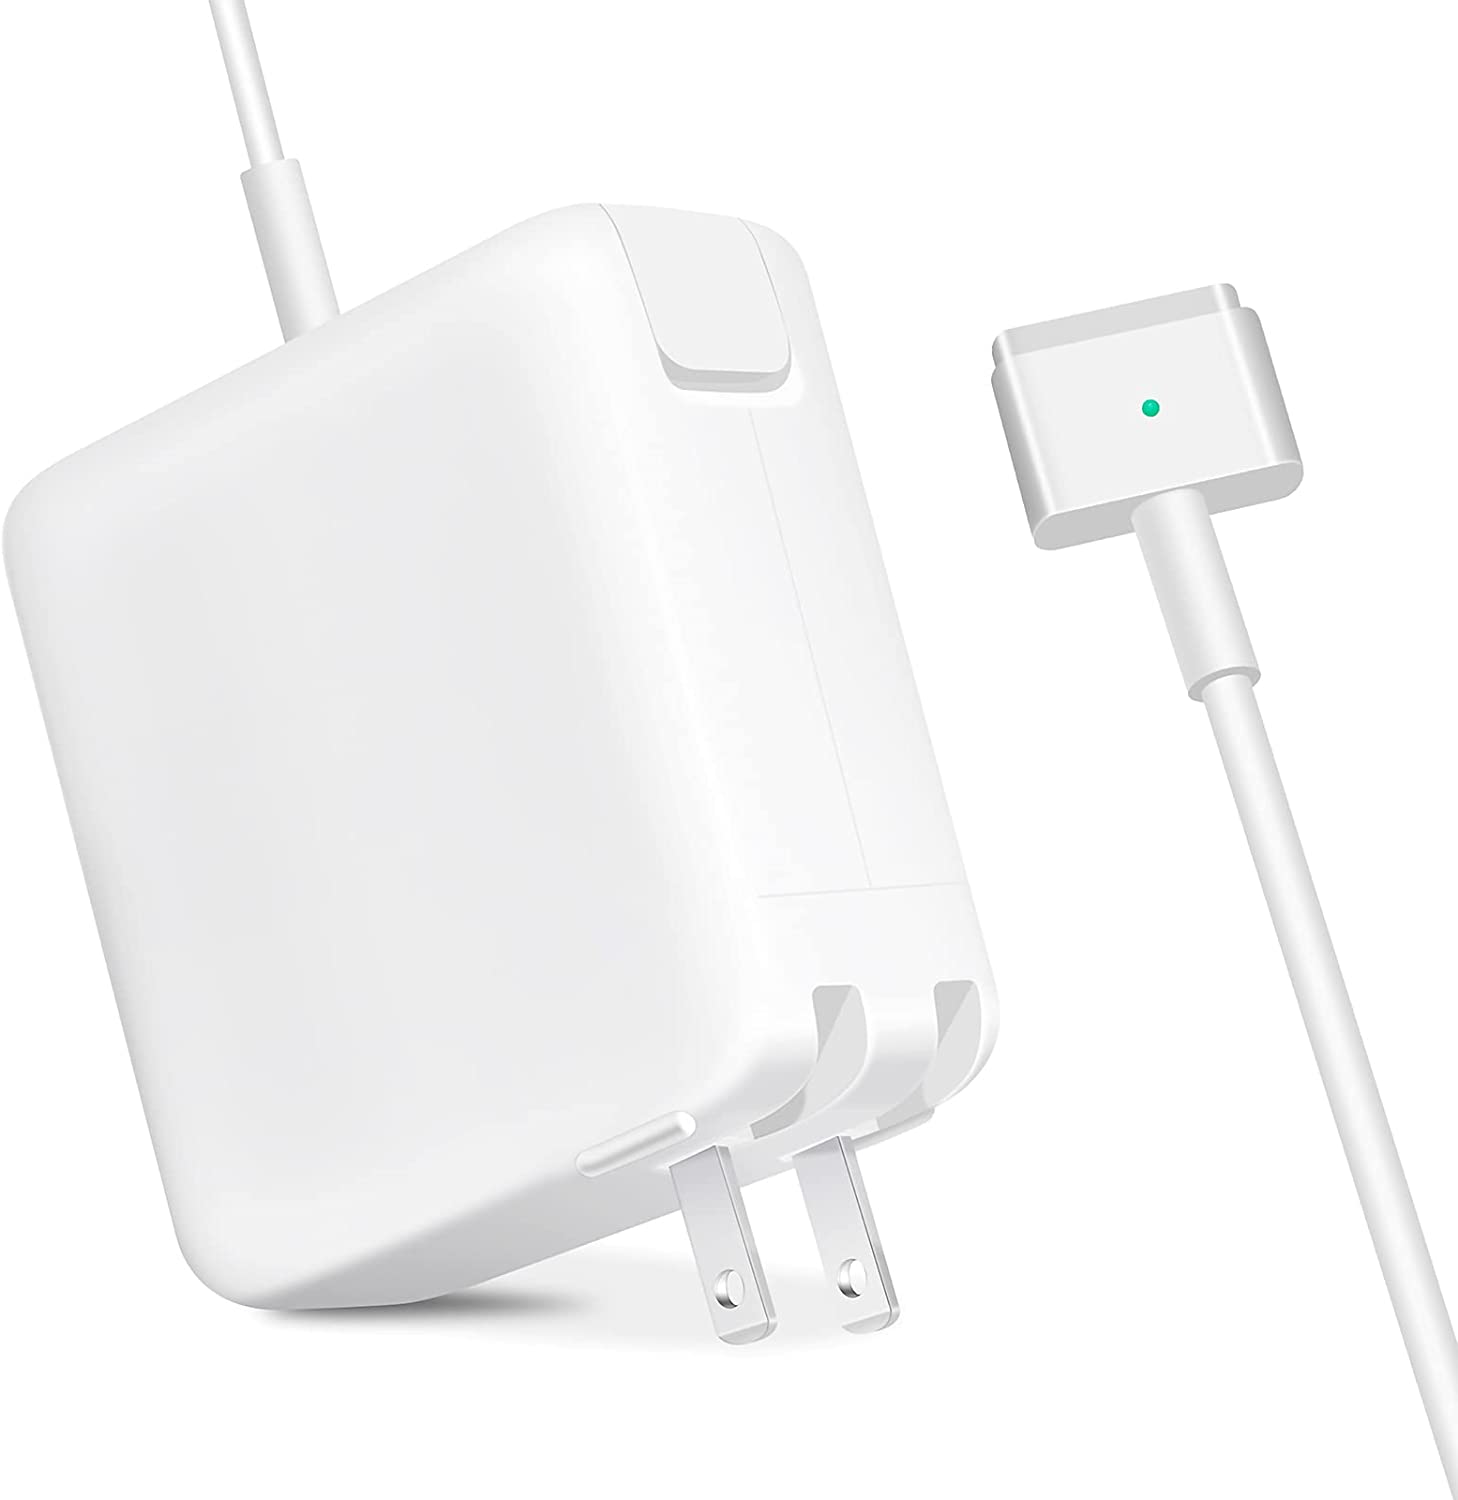  Macbook Air Charger